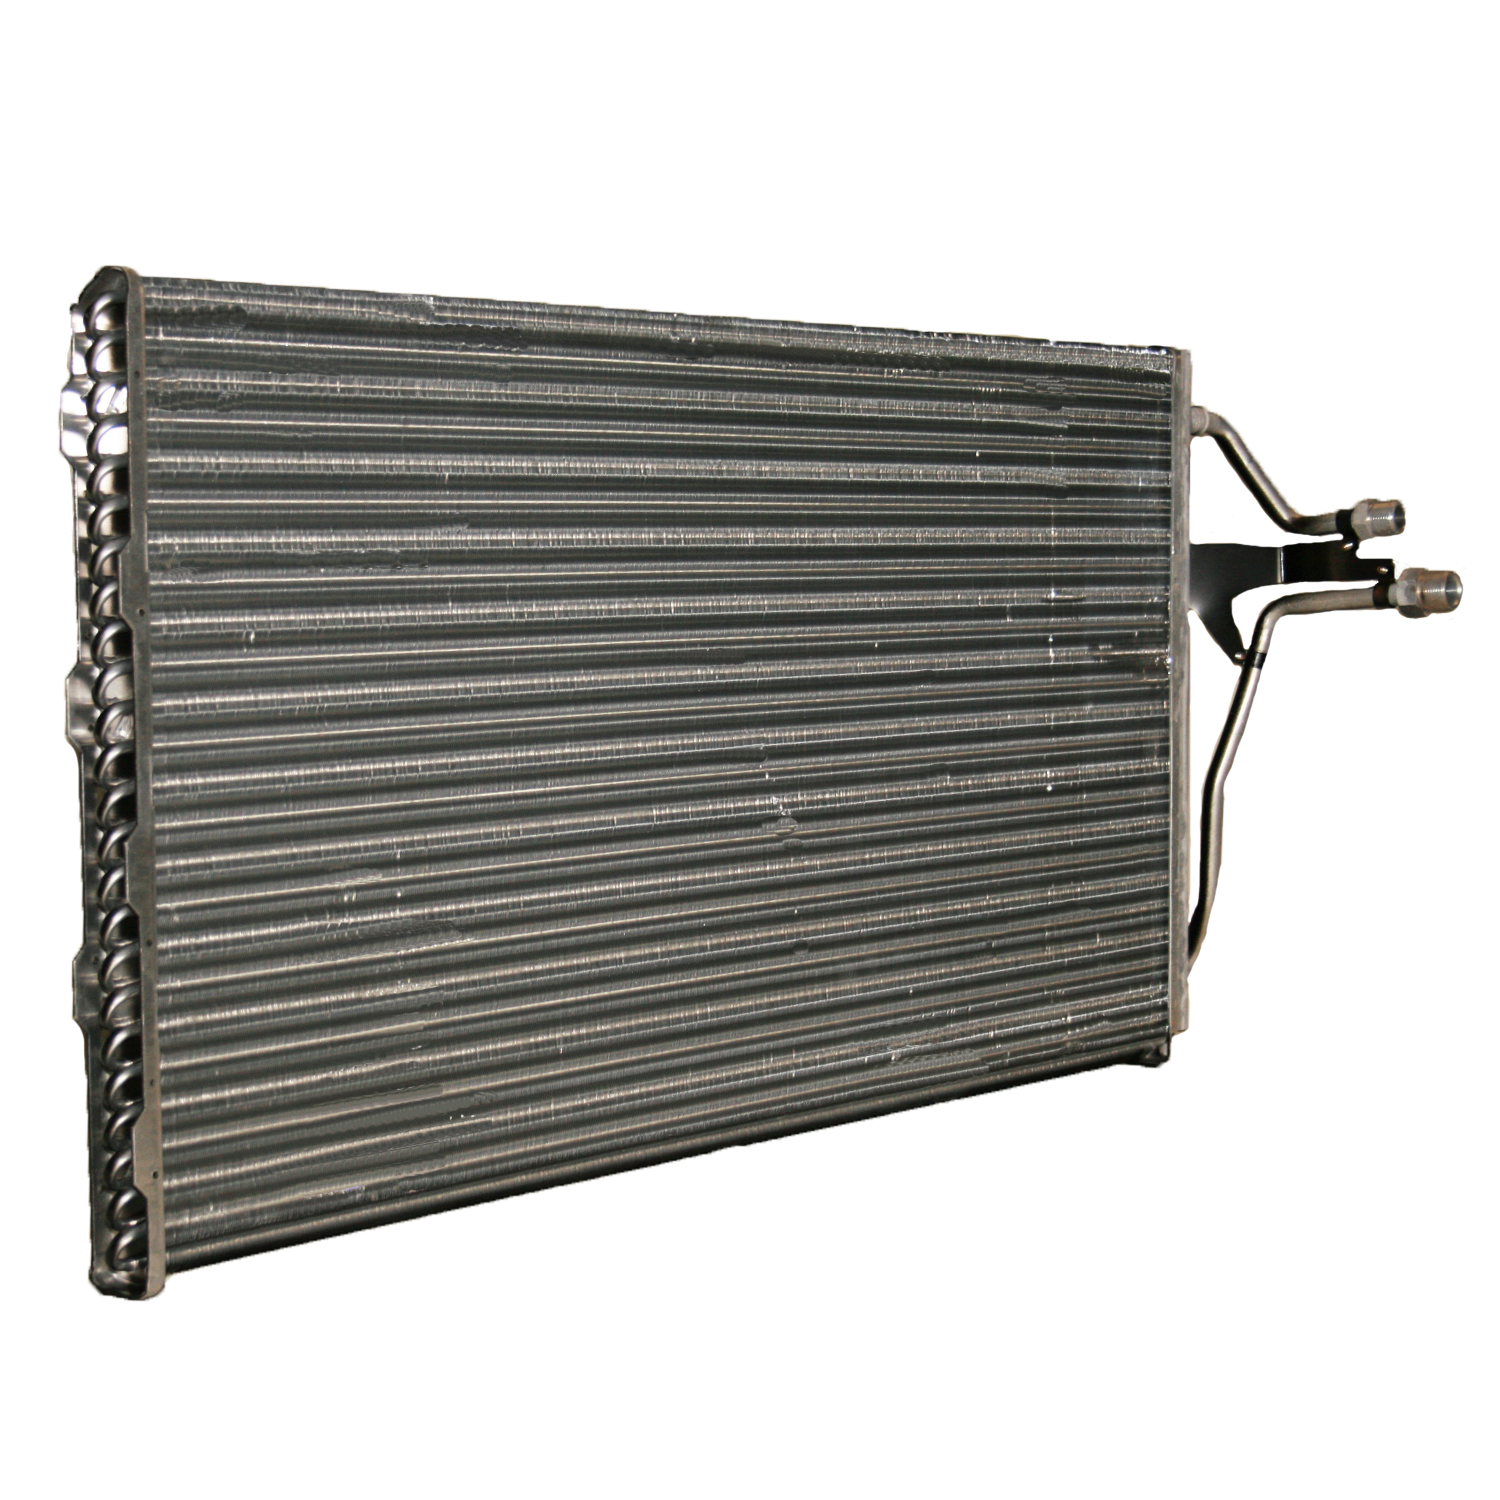 TCW Condenser 44-4294 New Product Image field_60b6a13a6e67c